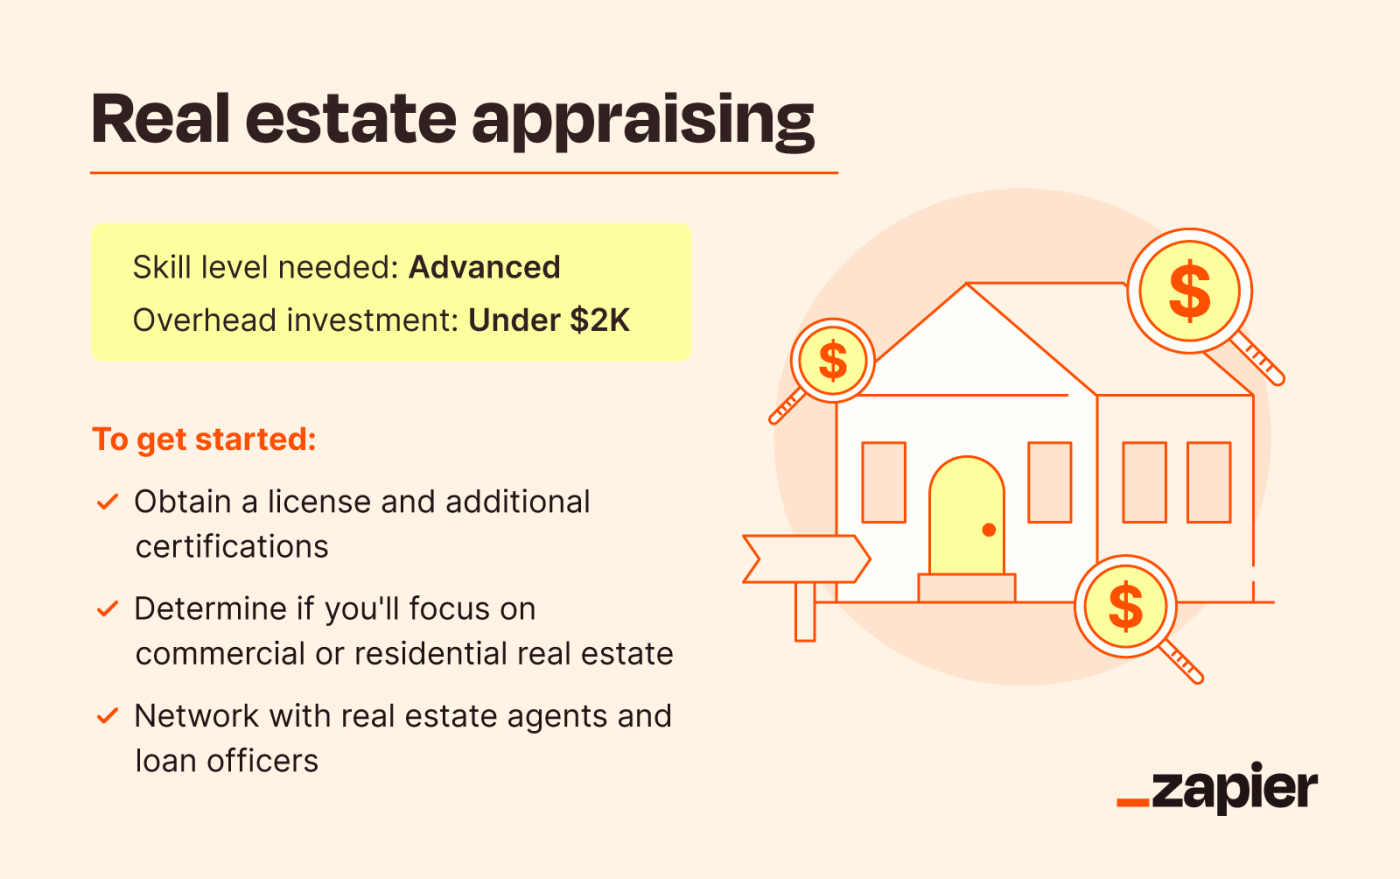 Image with home icon and magnifying glass depicting real estate appraising and showing that skill level needed is "advanced," overhead investment is under $2K, and tips to get started. 